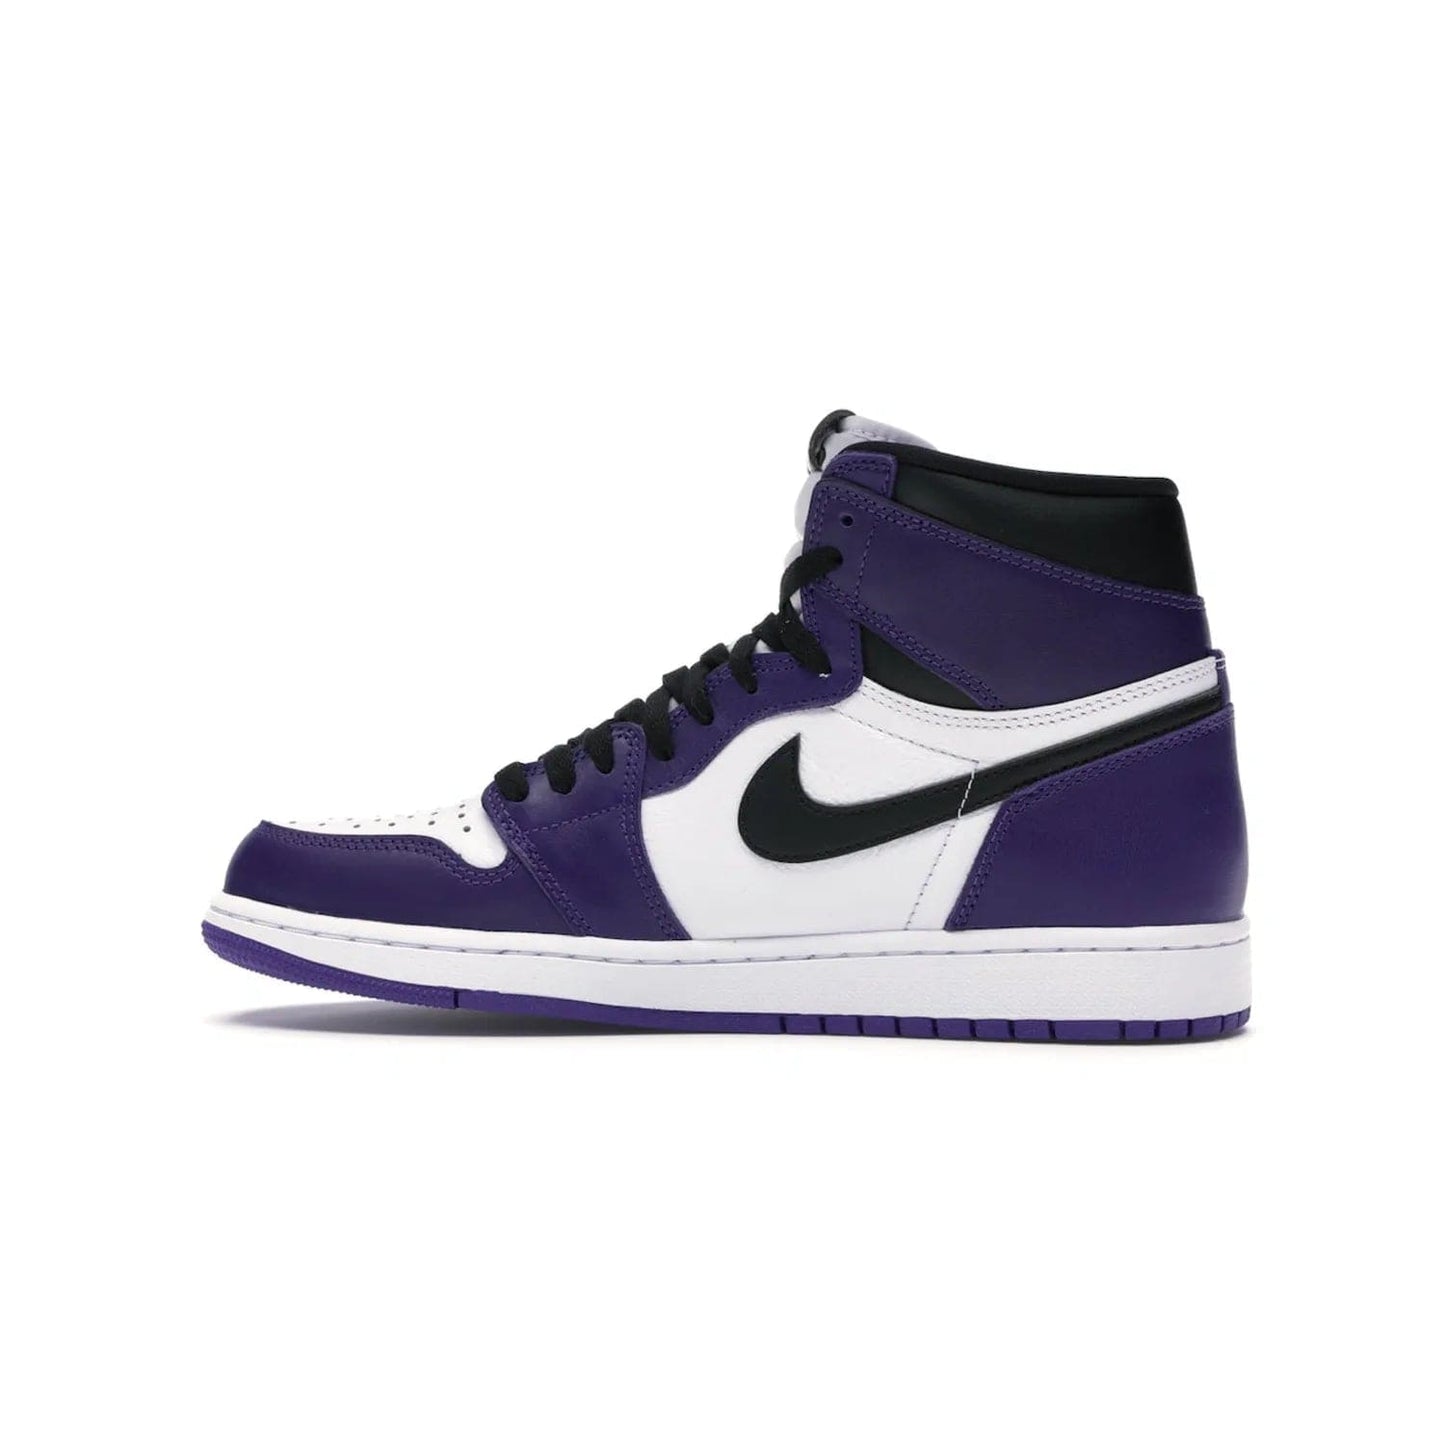 Jordan 1 Retro High Court Purple White - Image 20 - Only at www.BallersClubKickz.com - Grab the classic Jordan 1 Retro High Court Purple White and add major flavor to your collection. White leather upper with Court Purple overlays and Swoosh logo. White midsole and purple outsole. Get yours and rep your Jordan Brand.